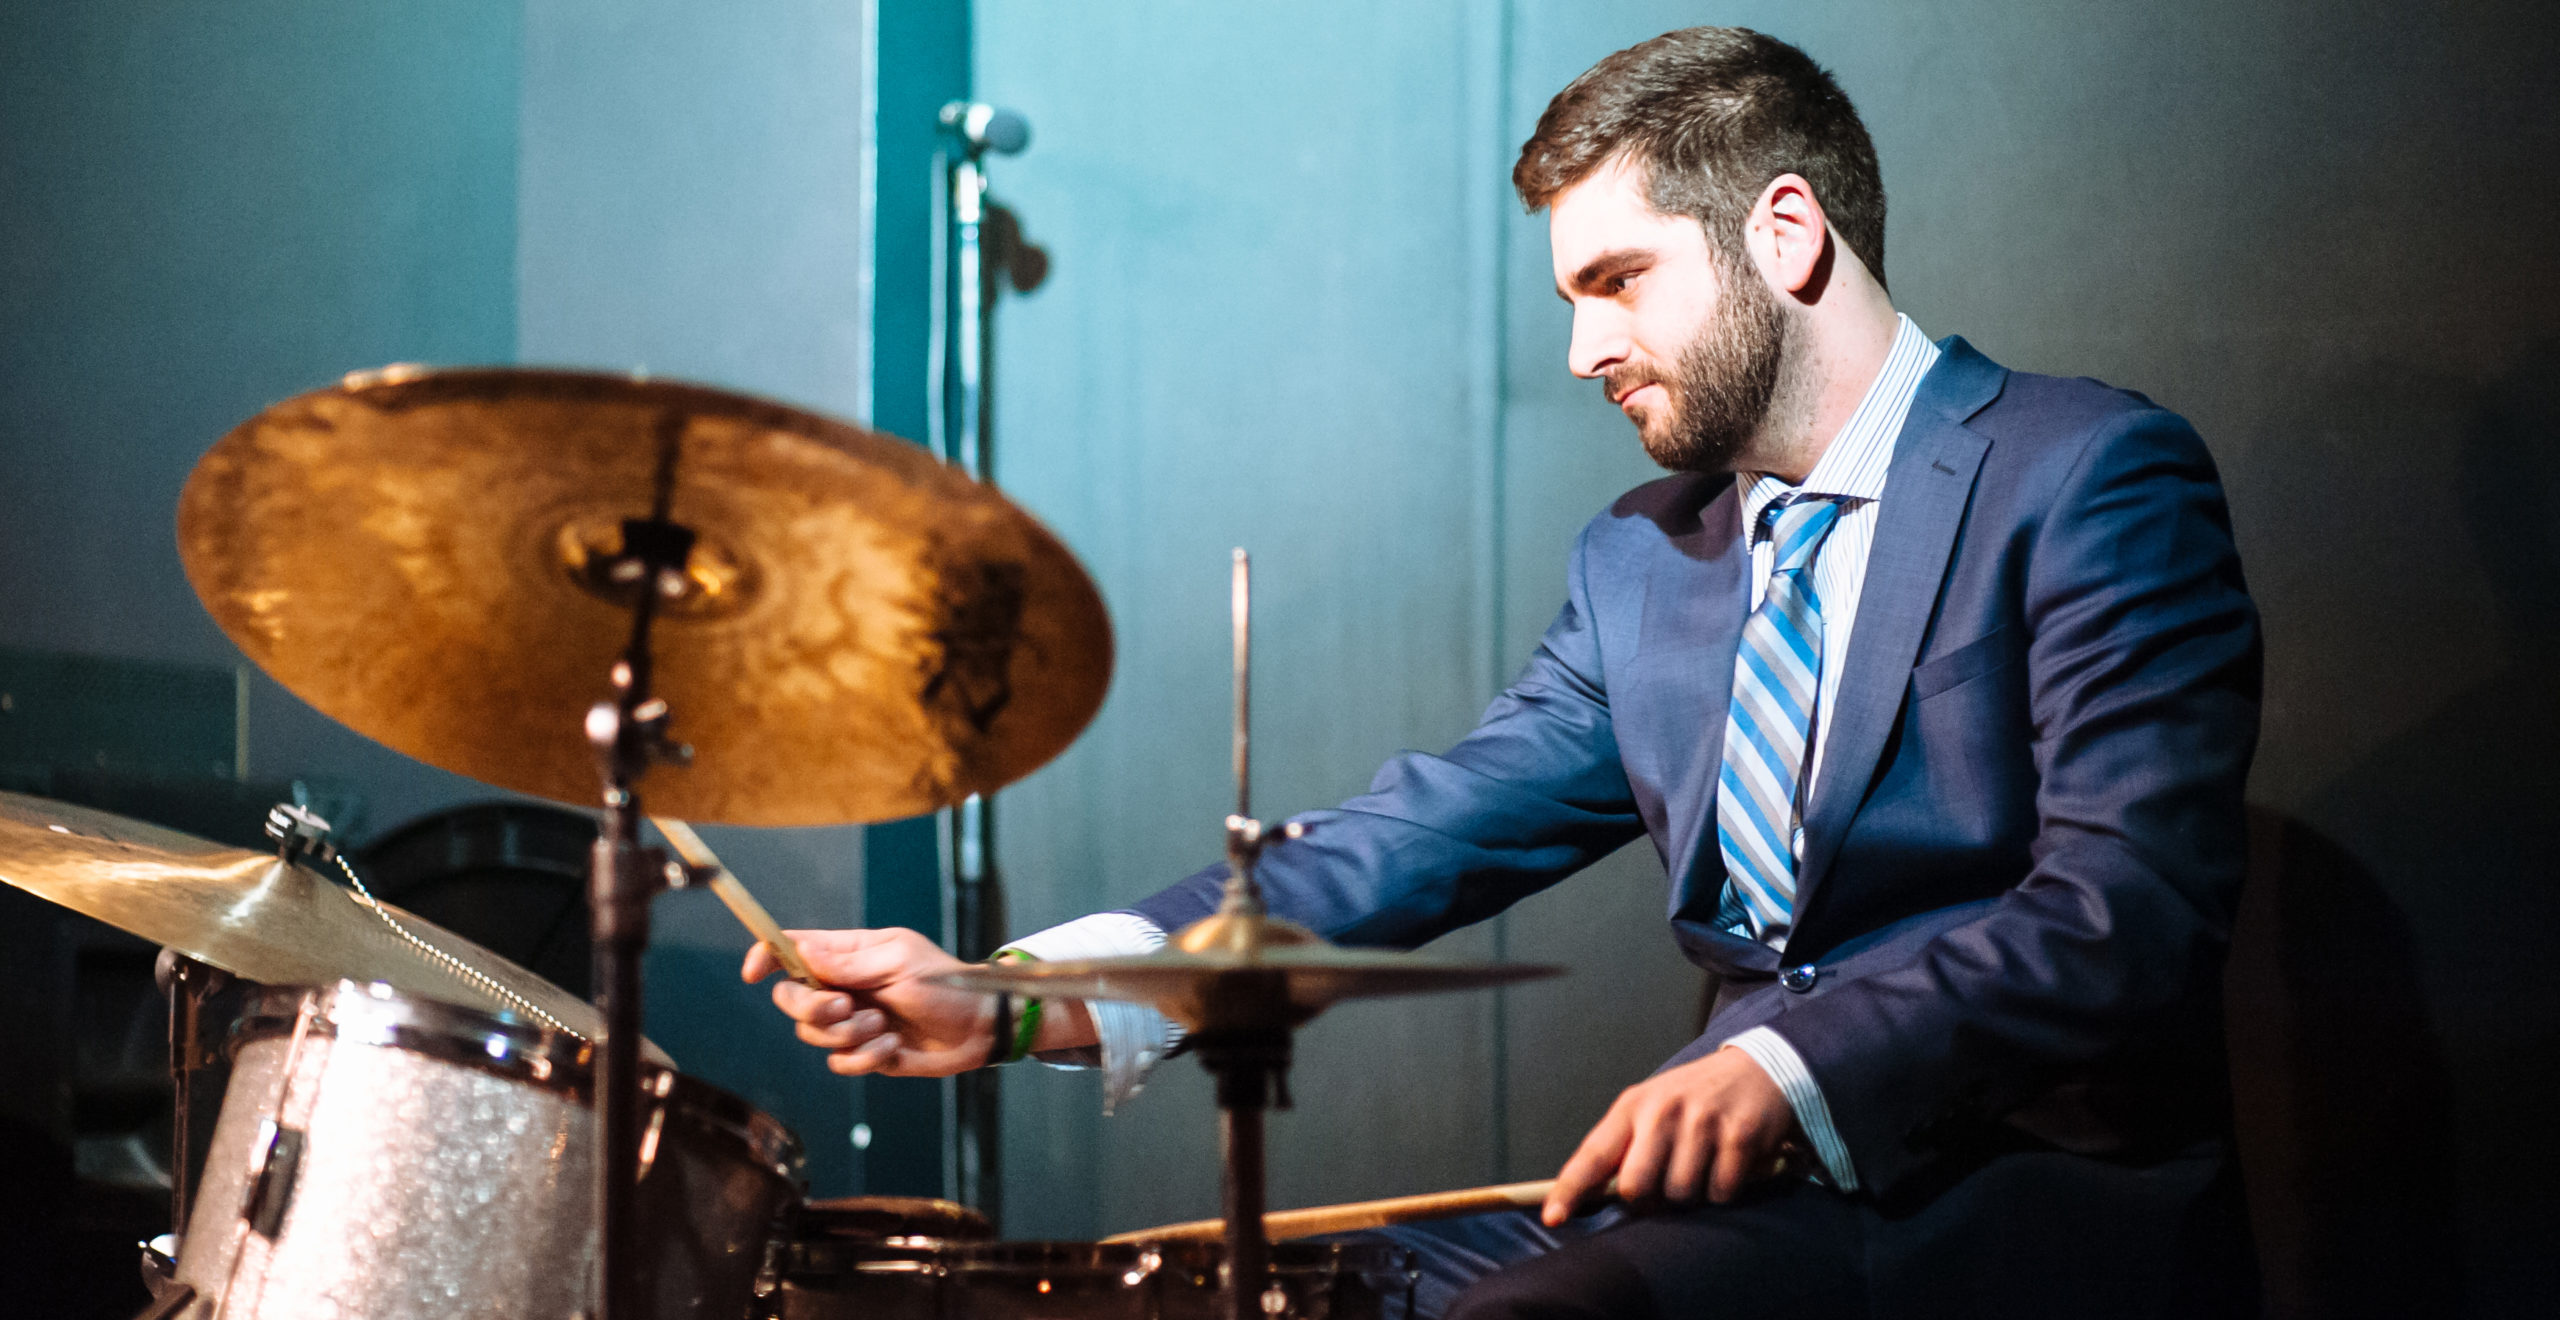 A drummer in a suit performing in a green room